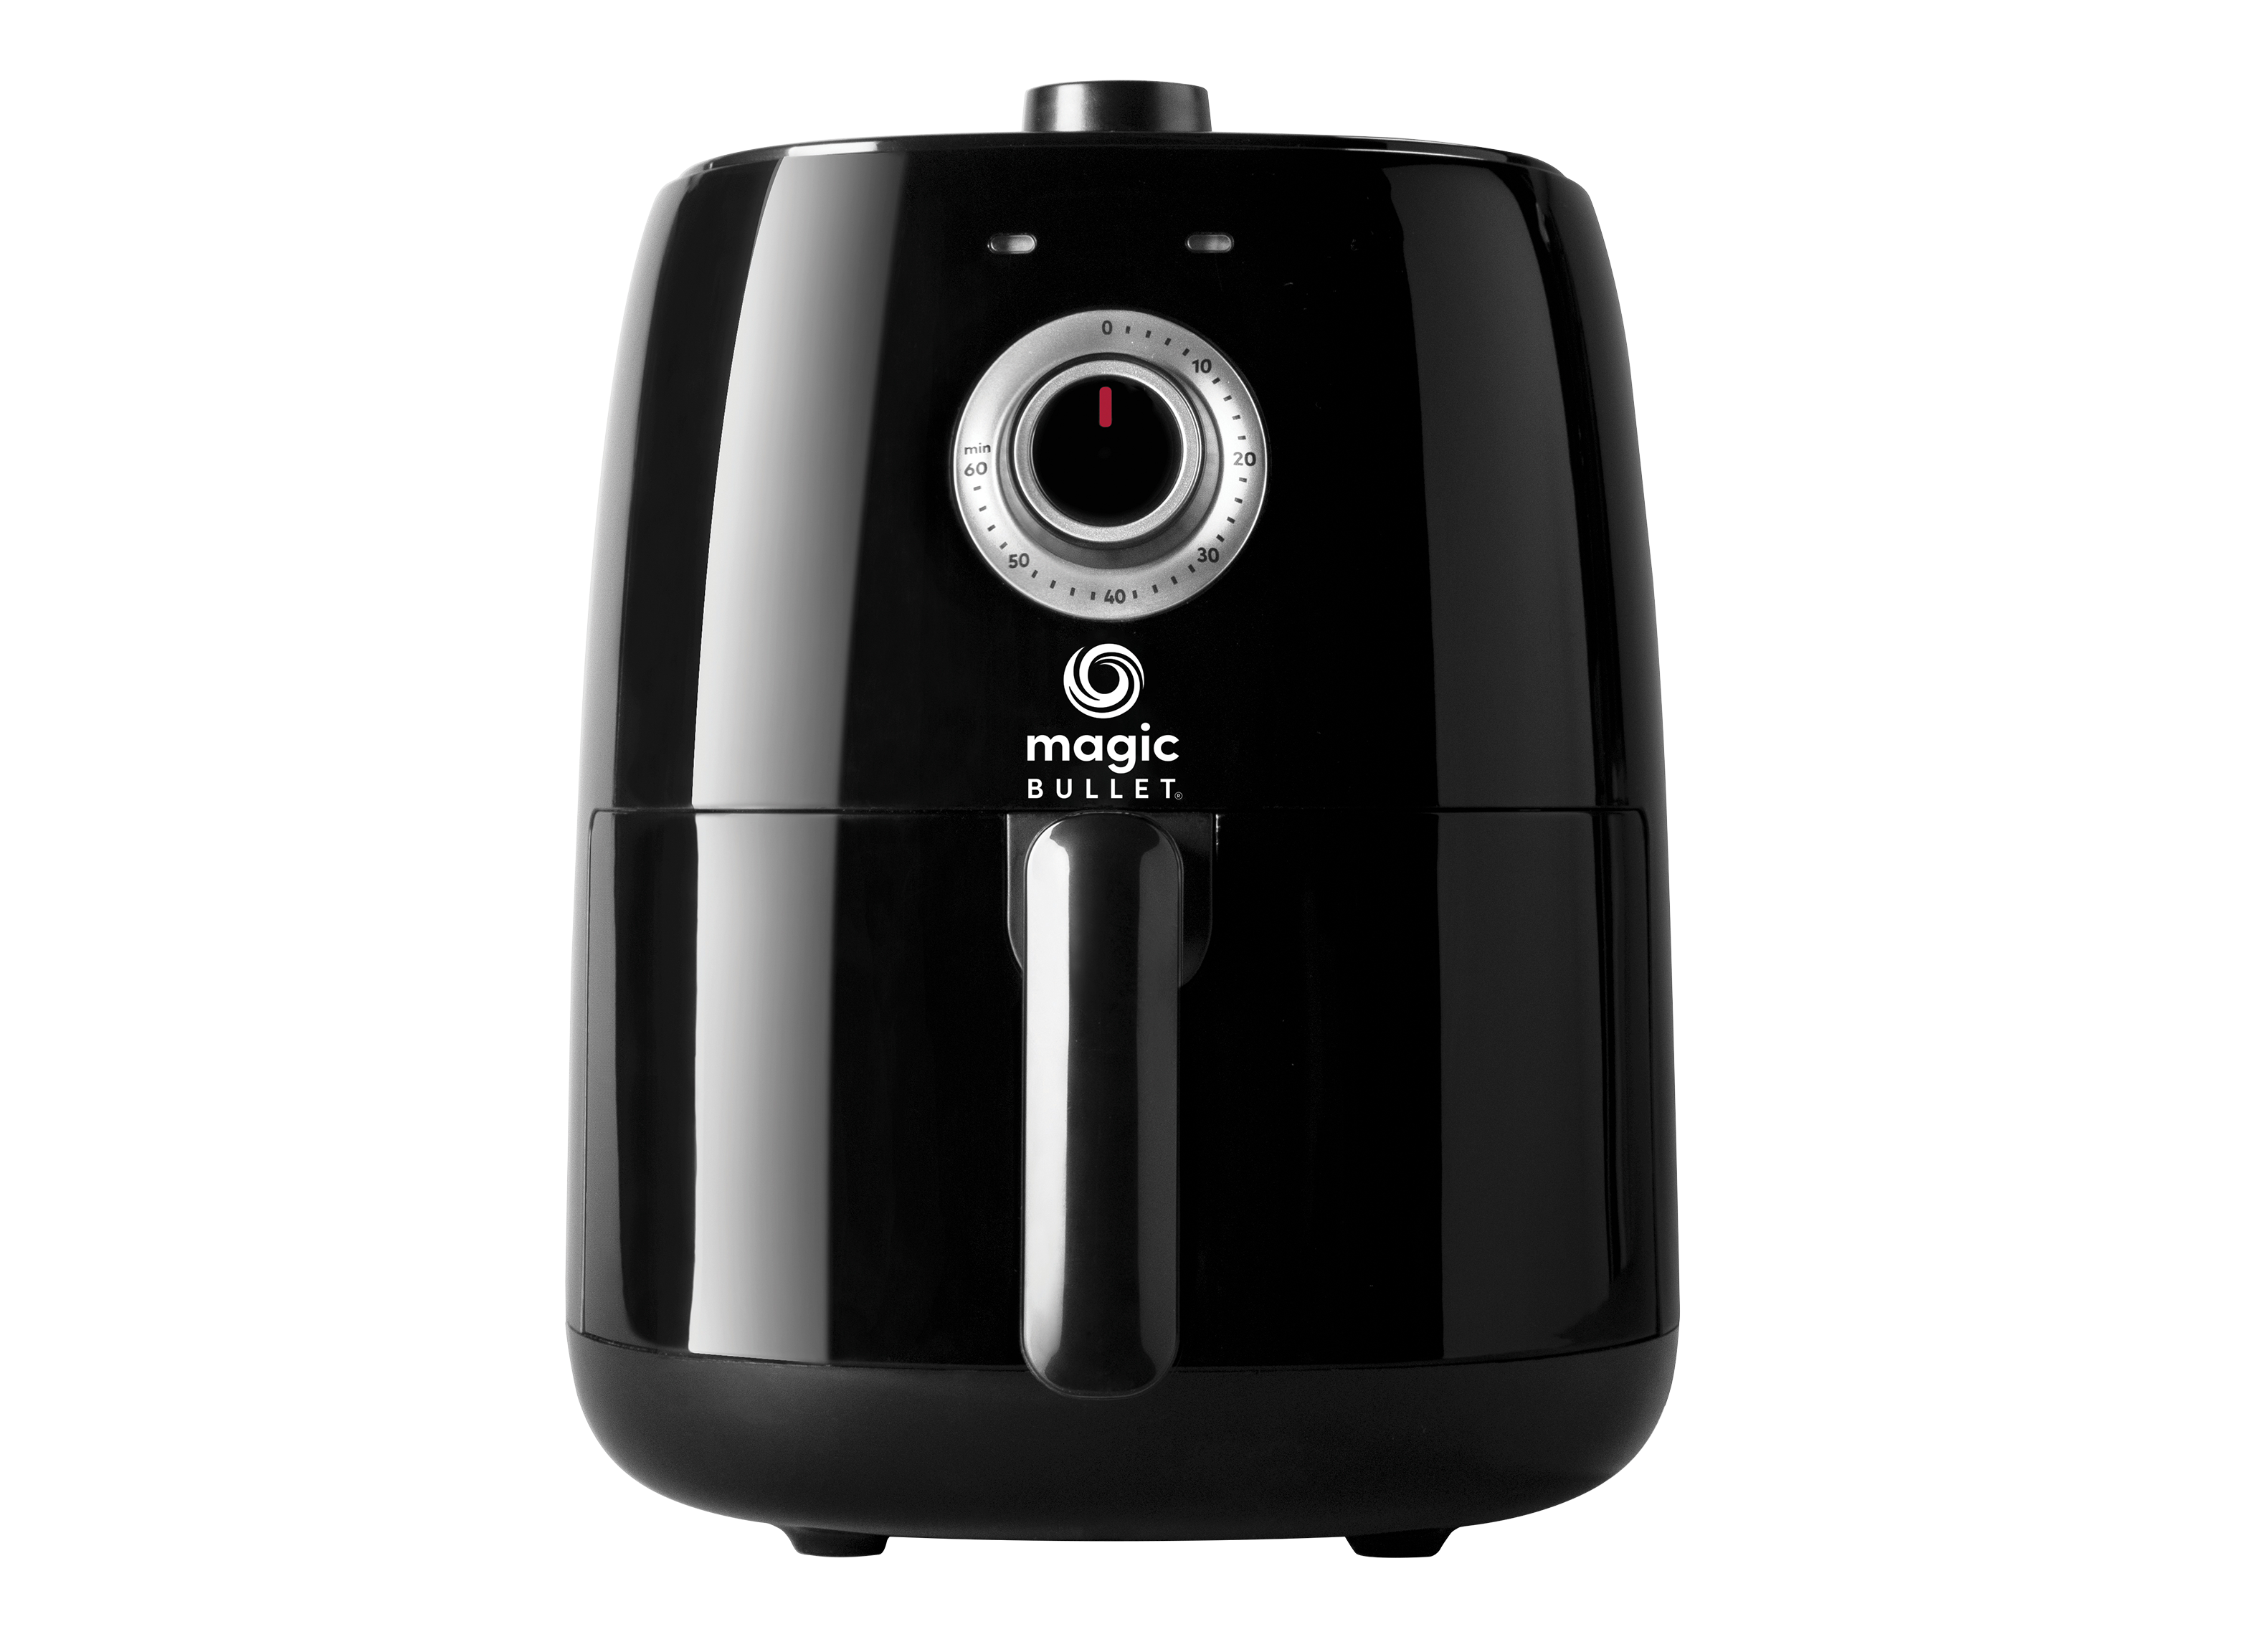 https://crdms.images.consumerreports.org/prod/products/cr/models/404423-air-fryers-magic-bullet-air-fryer-10022732.png